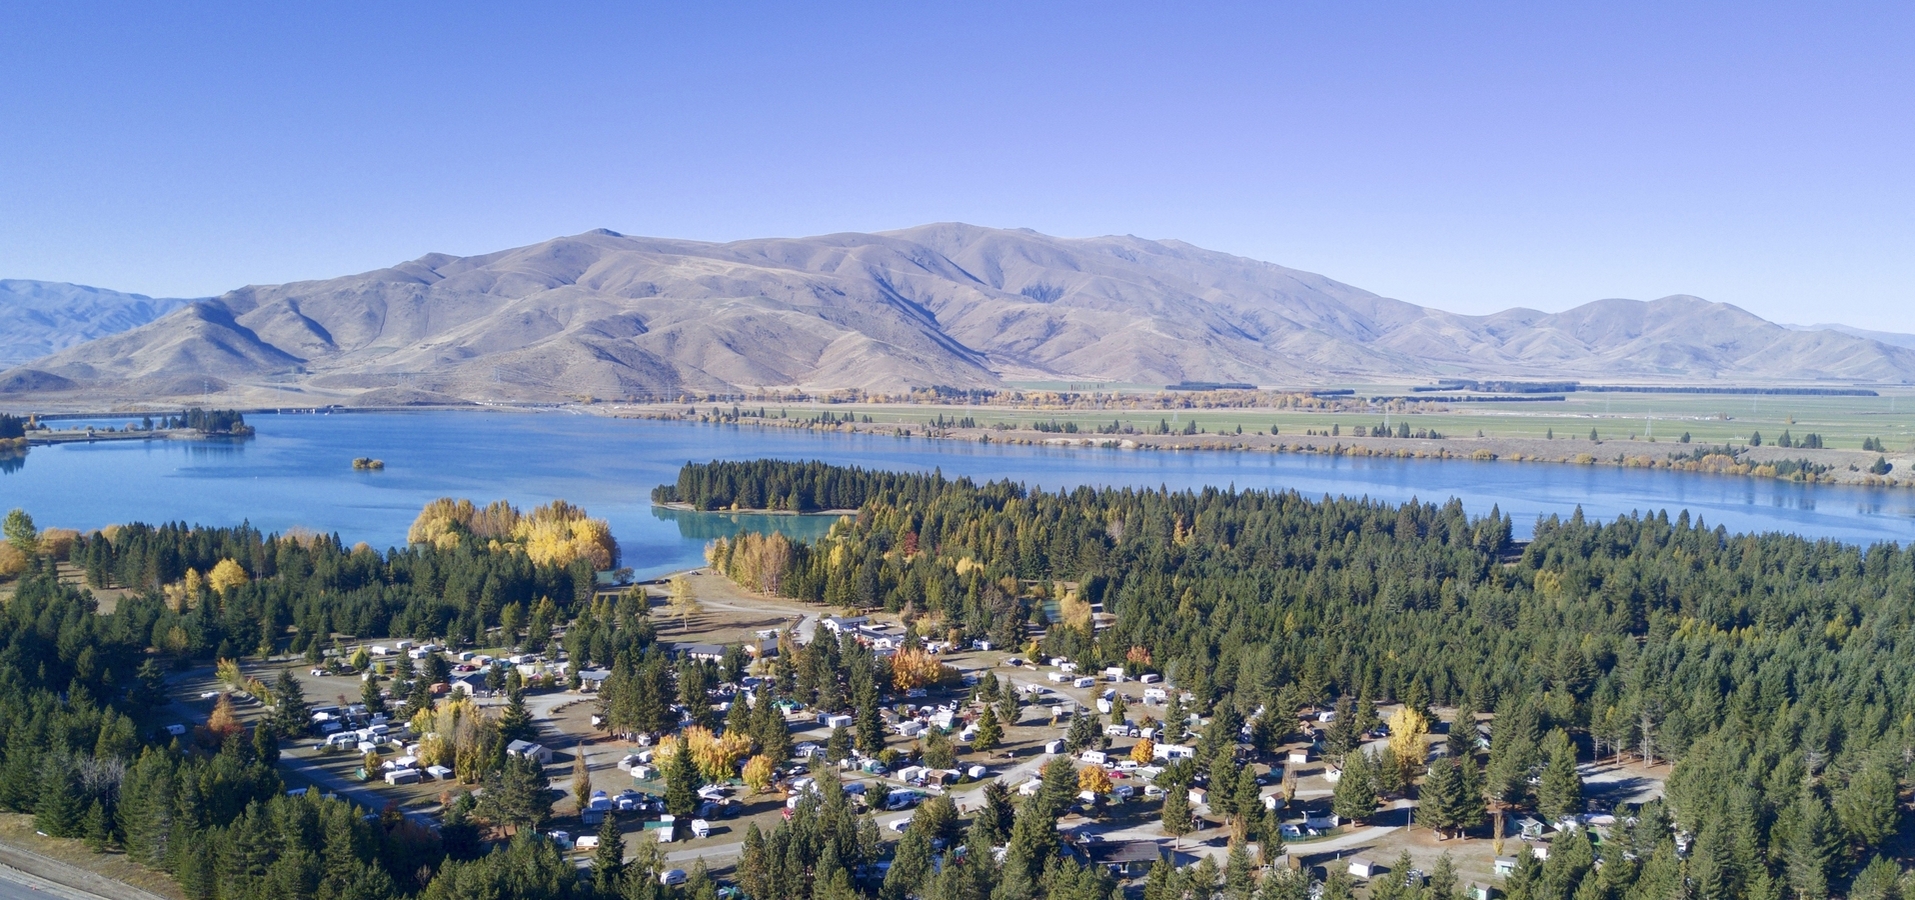 holiday park is located in the heart of Mackenzie Country